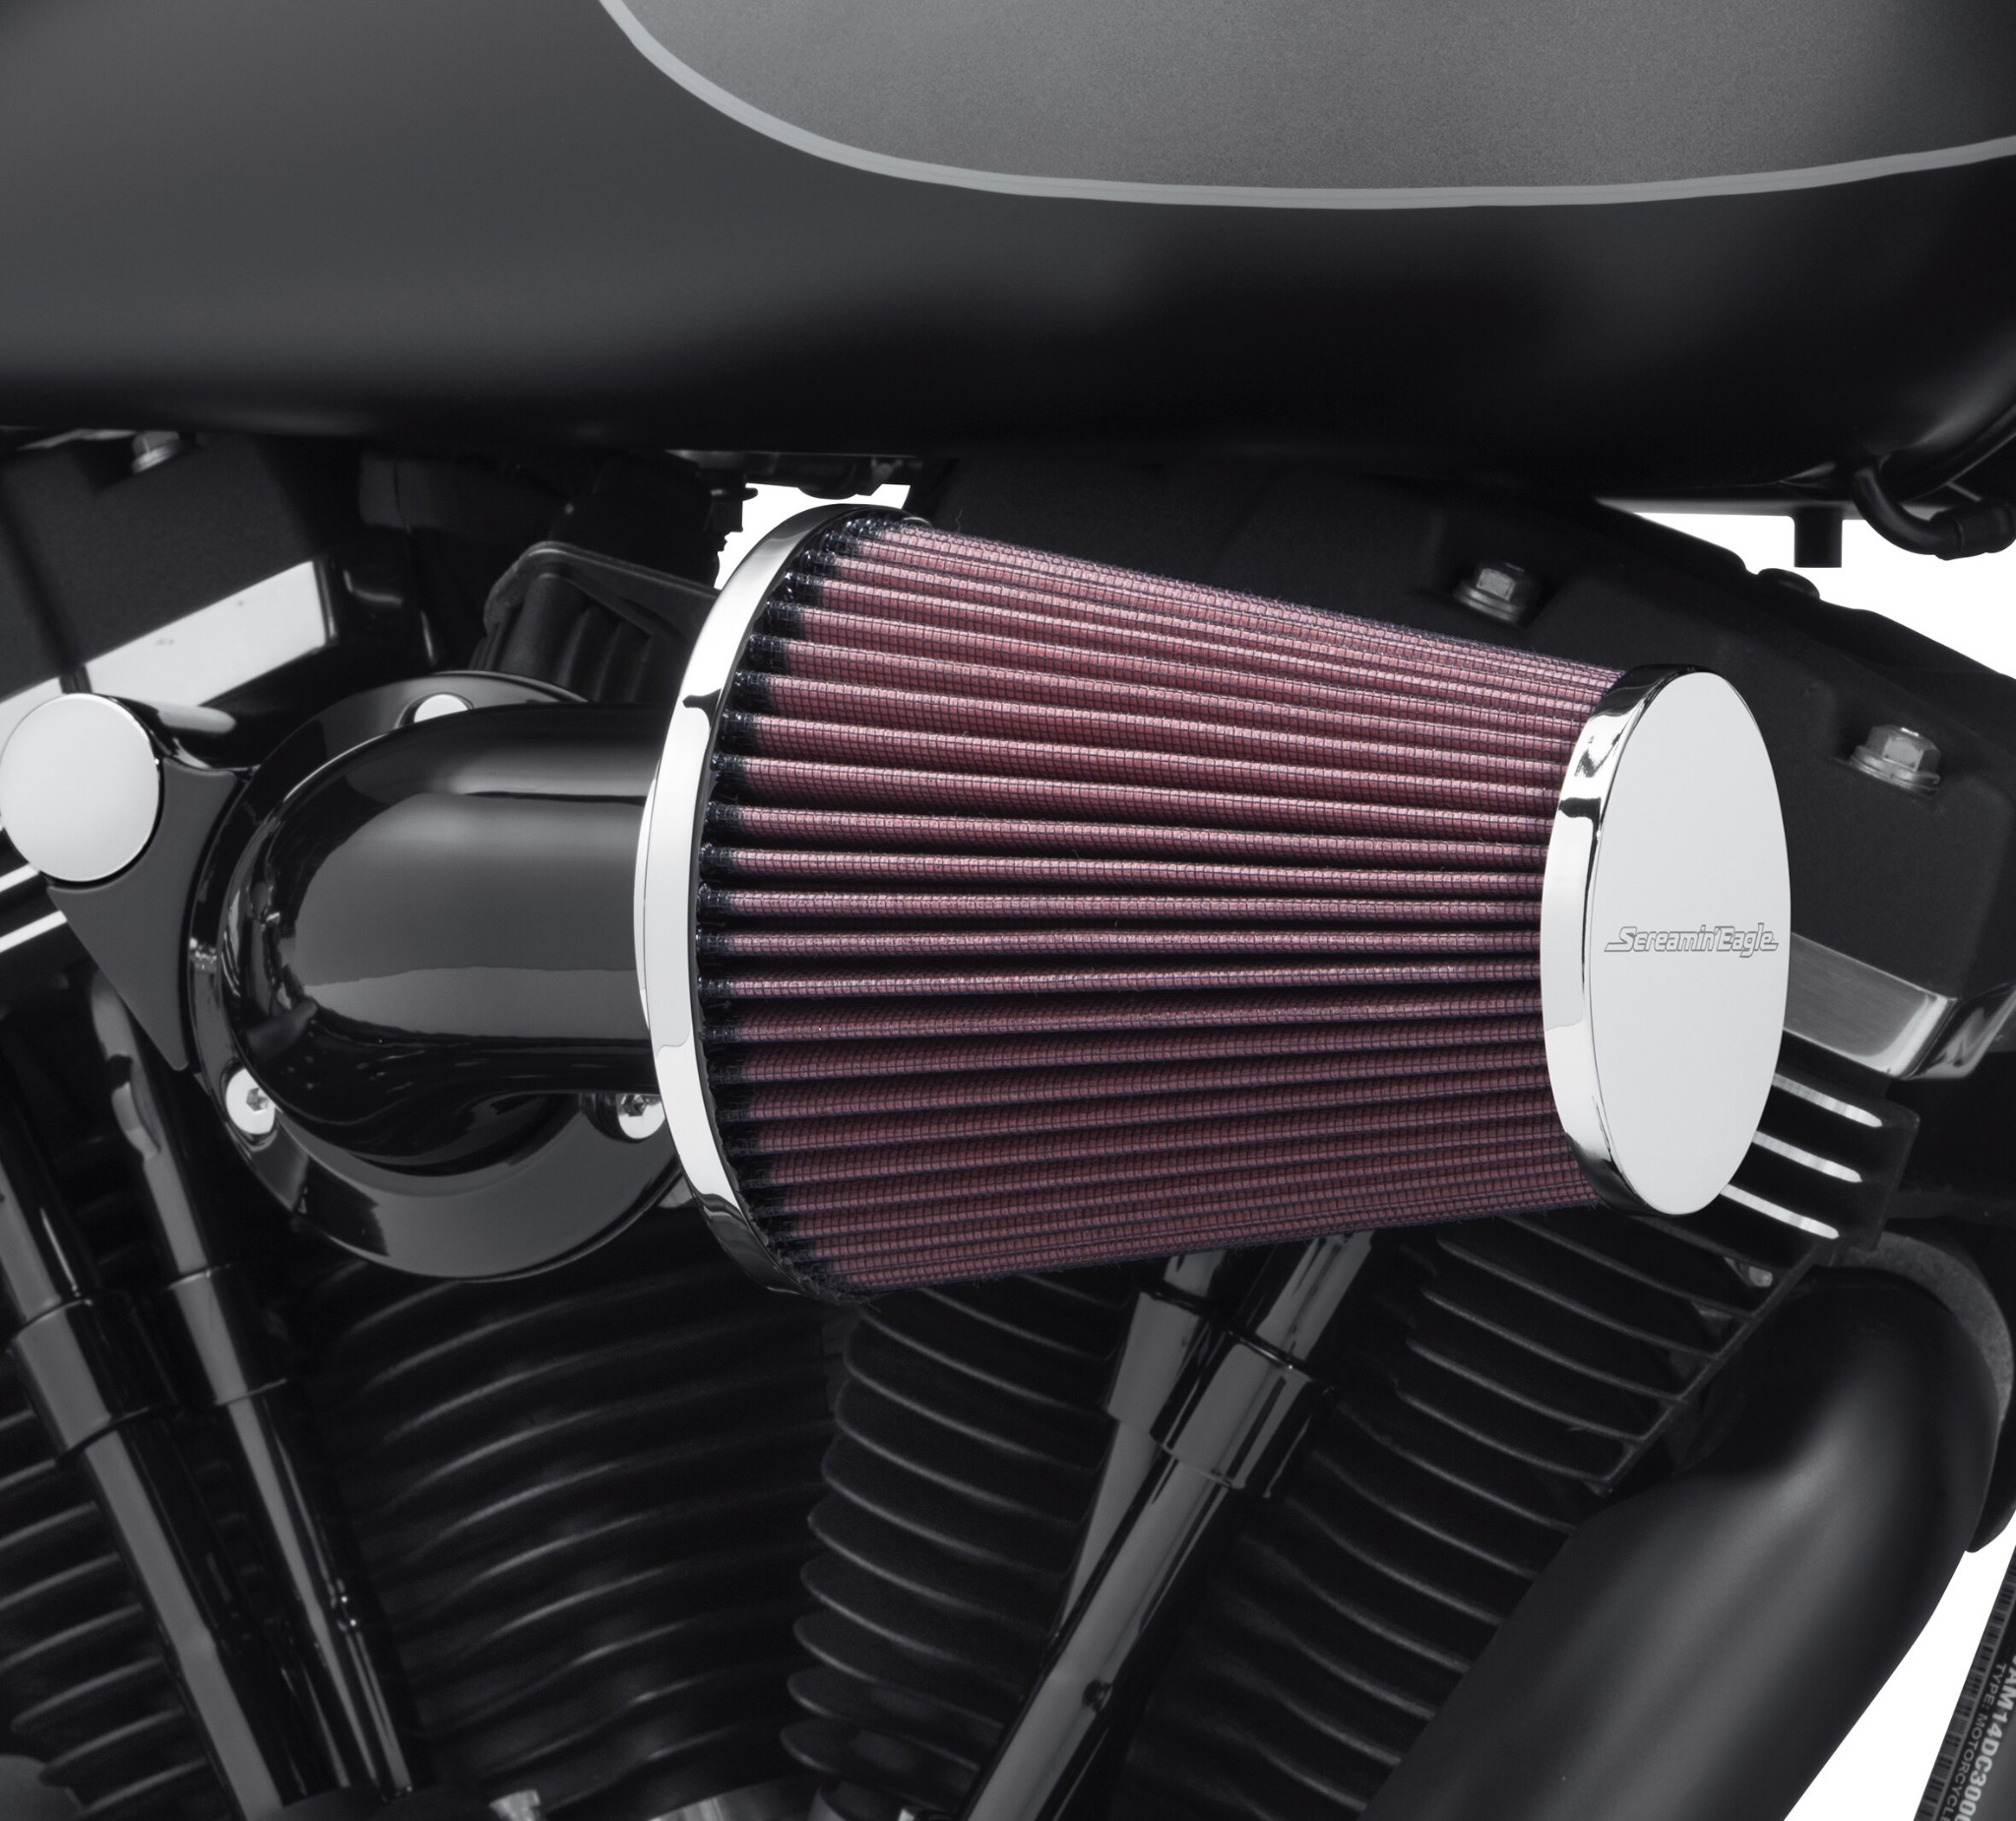 How to install an aftermarket air cleaner on your Harley - RevZilla